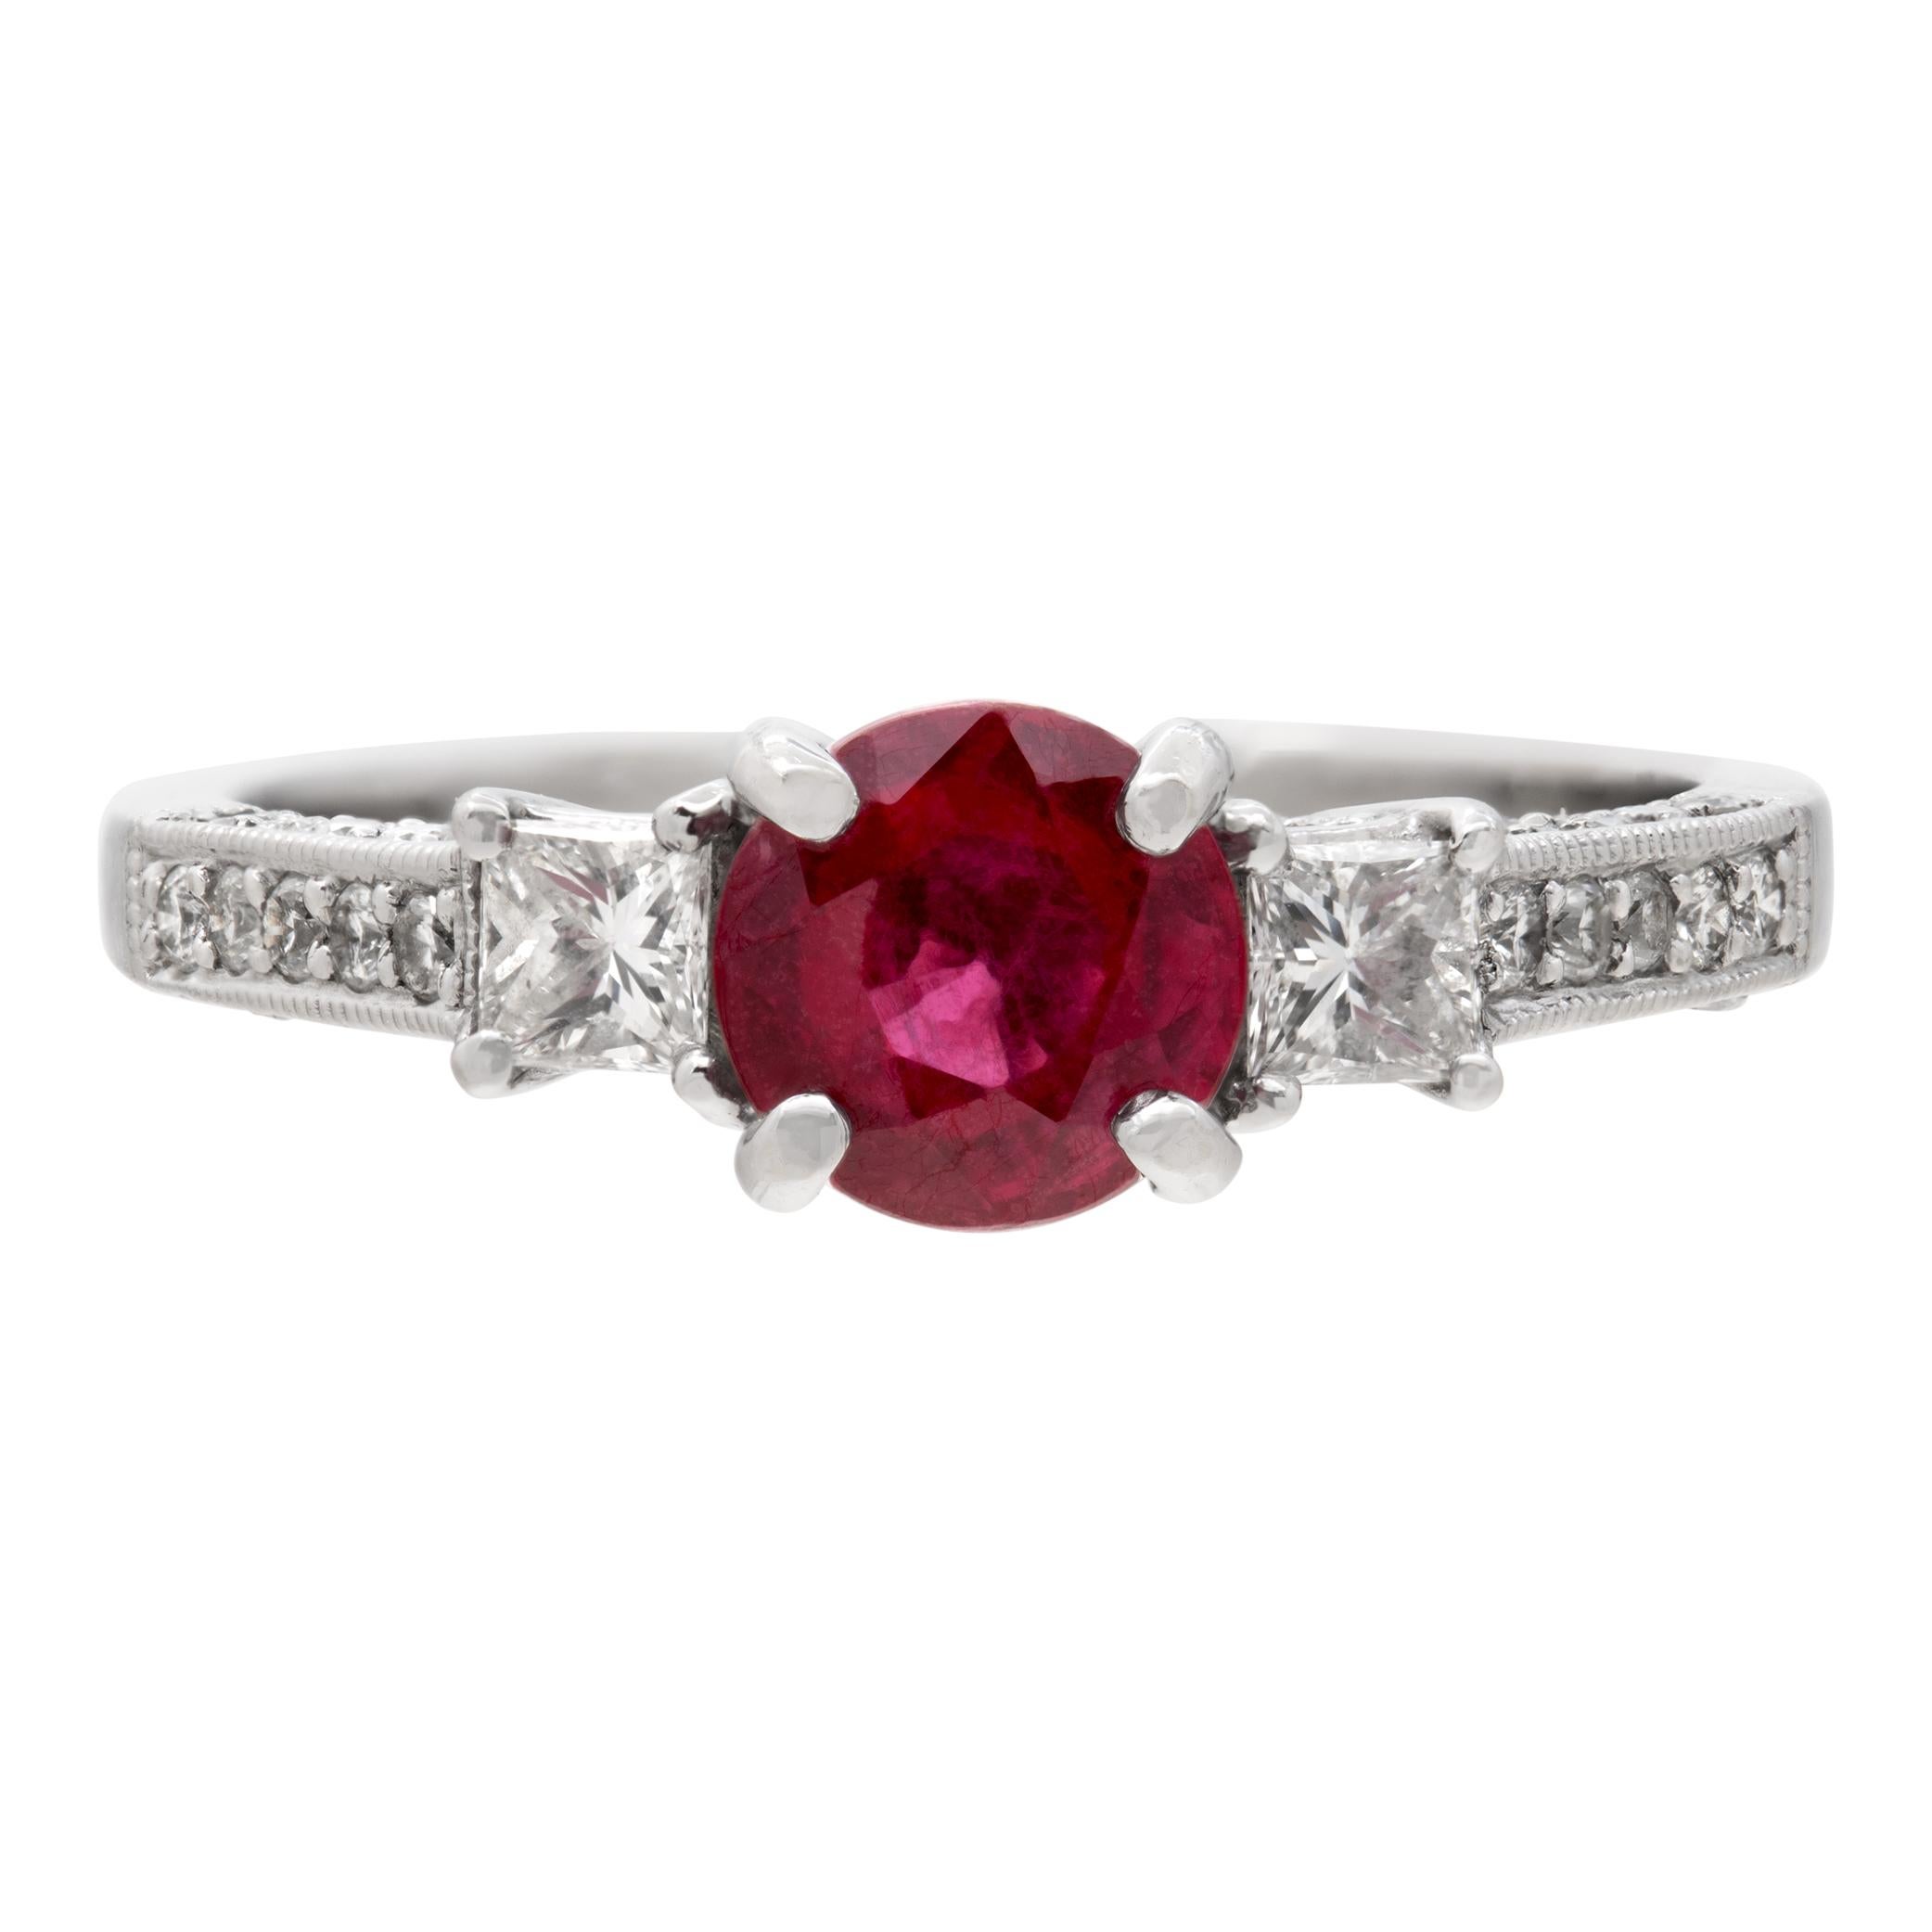 18k white gold ring with approx 0.80 ct princess cut center ruby with approx 0.30 cts of diamond accents. Size 7.This Ruby ring is currently size 7 and some items can be sized up or down, please ask! It weighs 2.4 pennyweights and is 18k White Gold.
